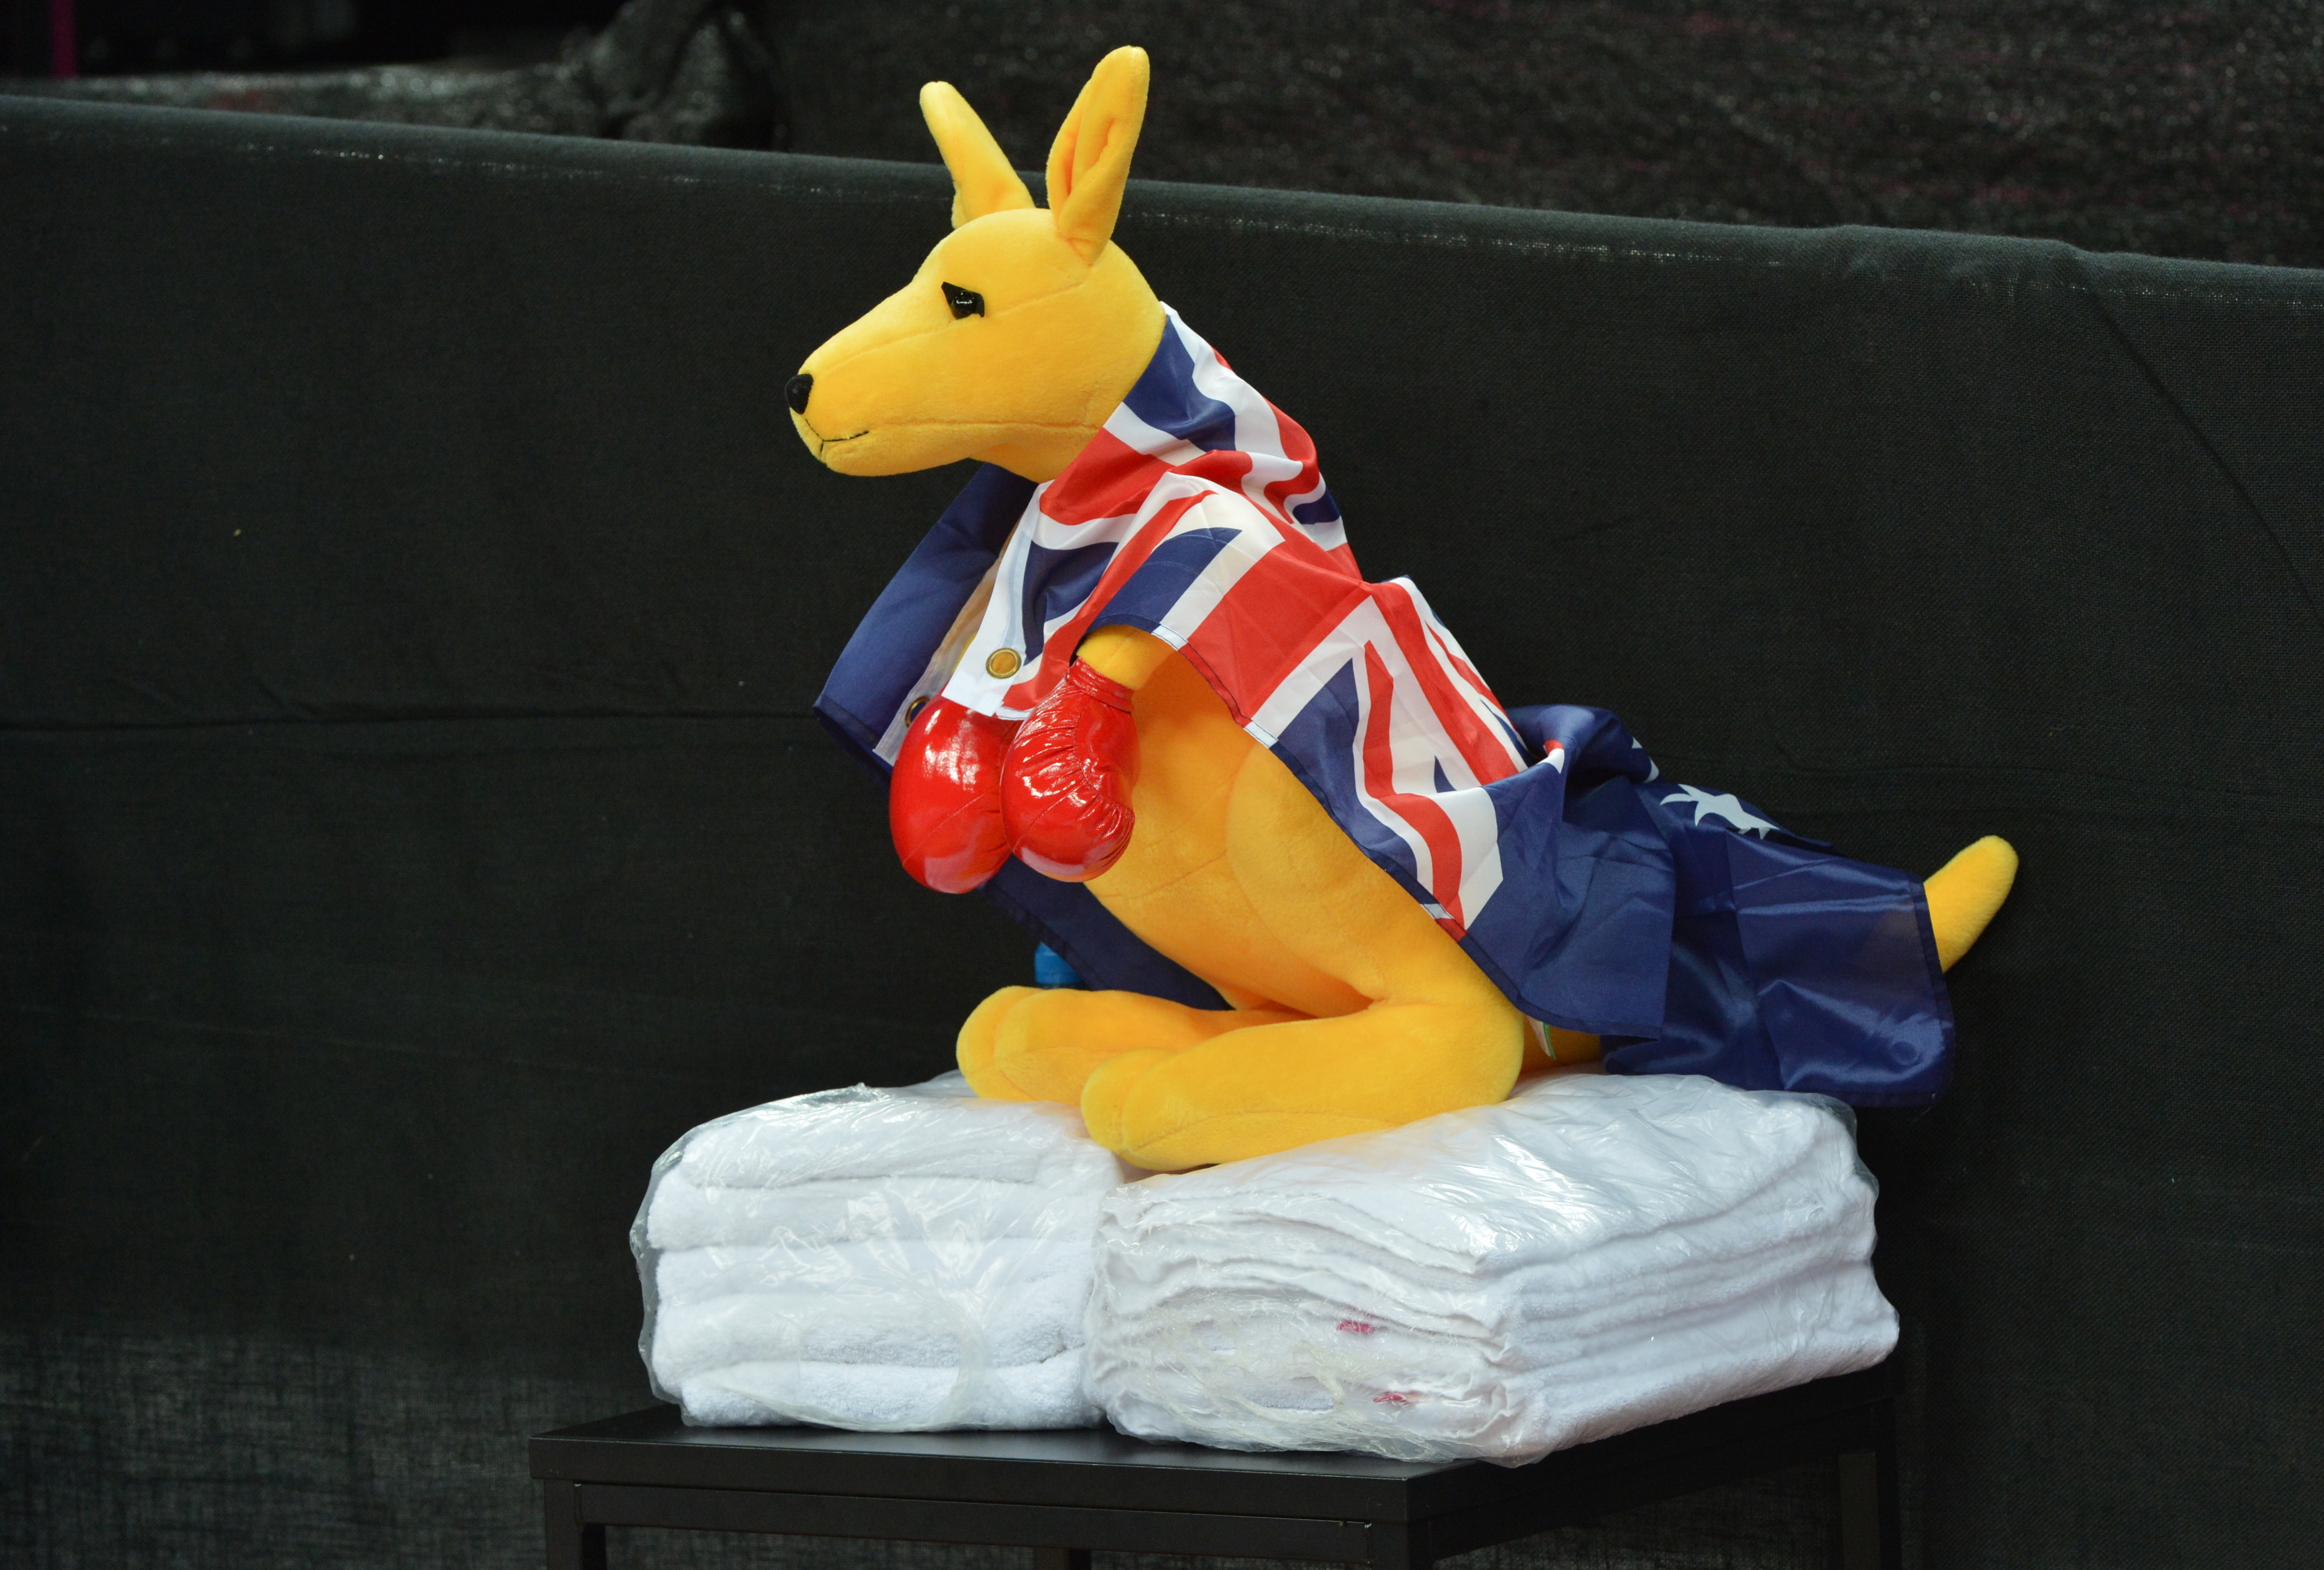 A toy kangaroo did make an appearance on the towels of the Australian team during the London 2012 Olympic Games. (Mark Ralston—AFP/Getty Images)